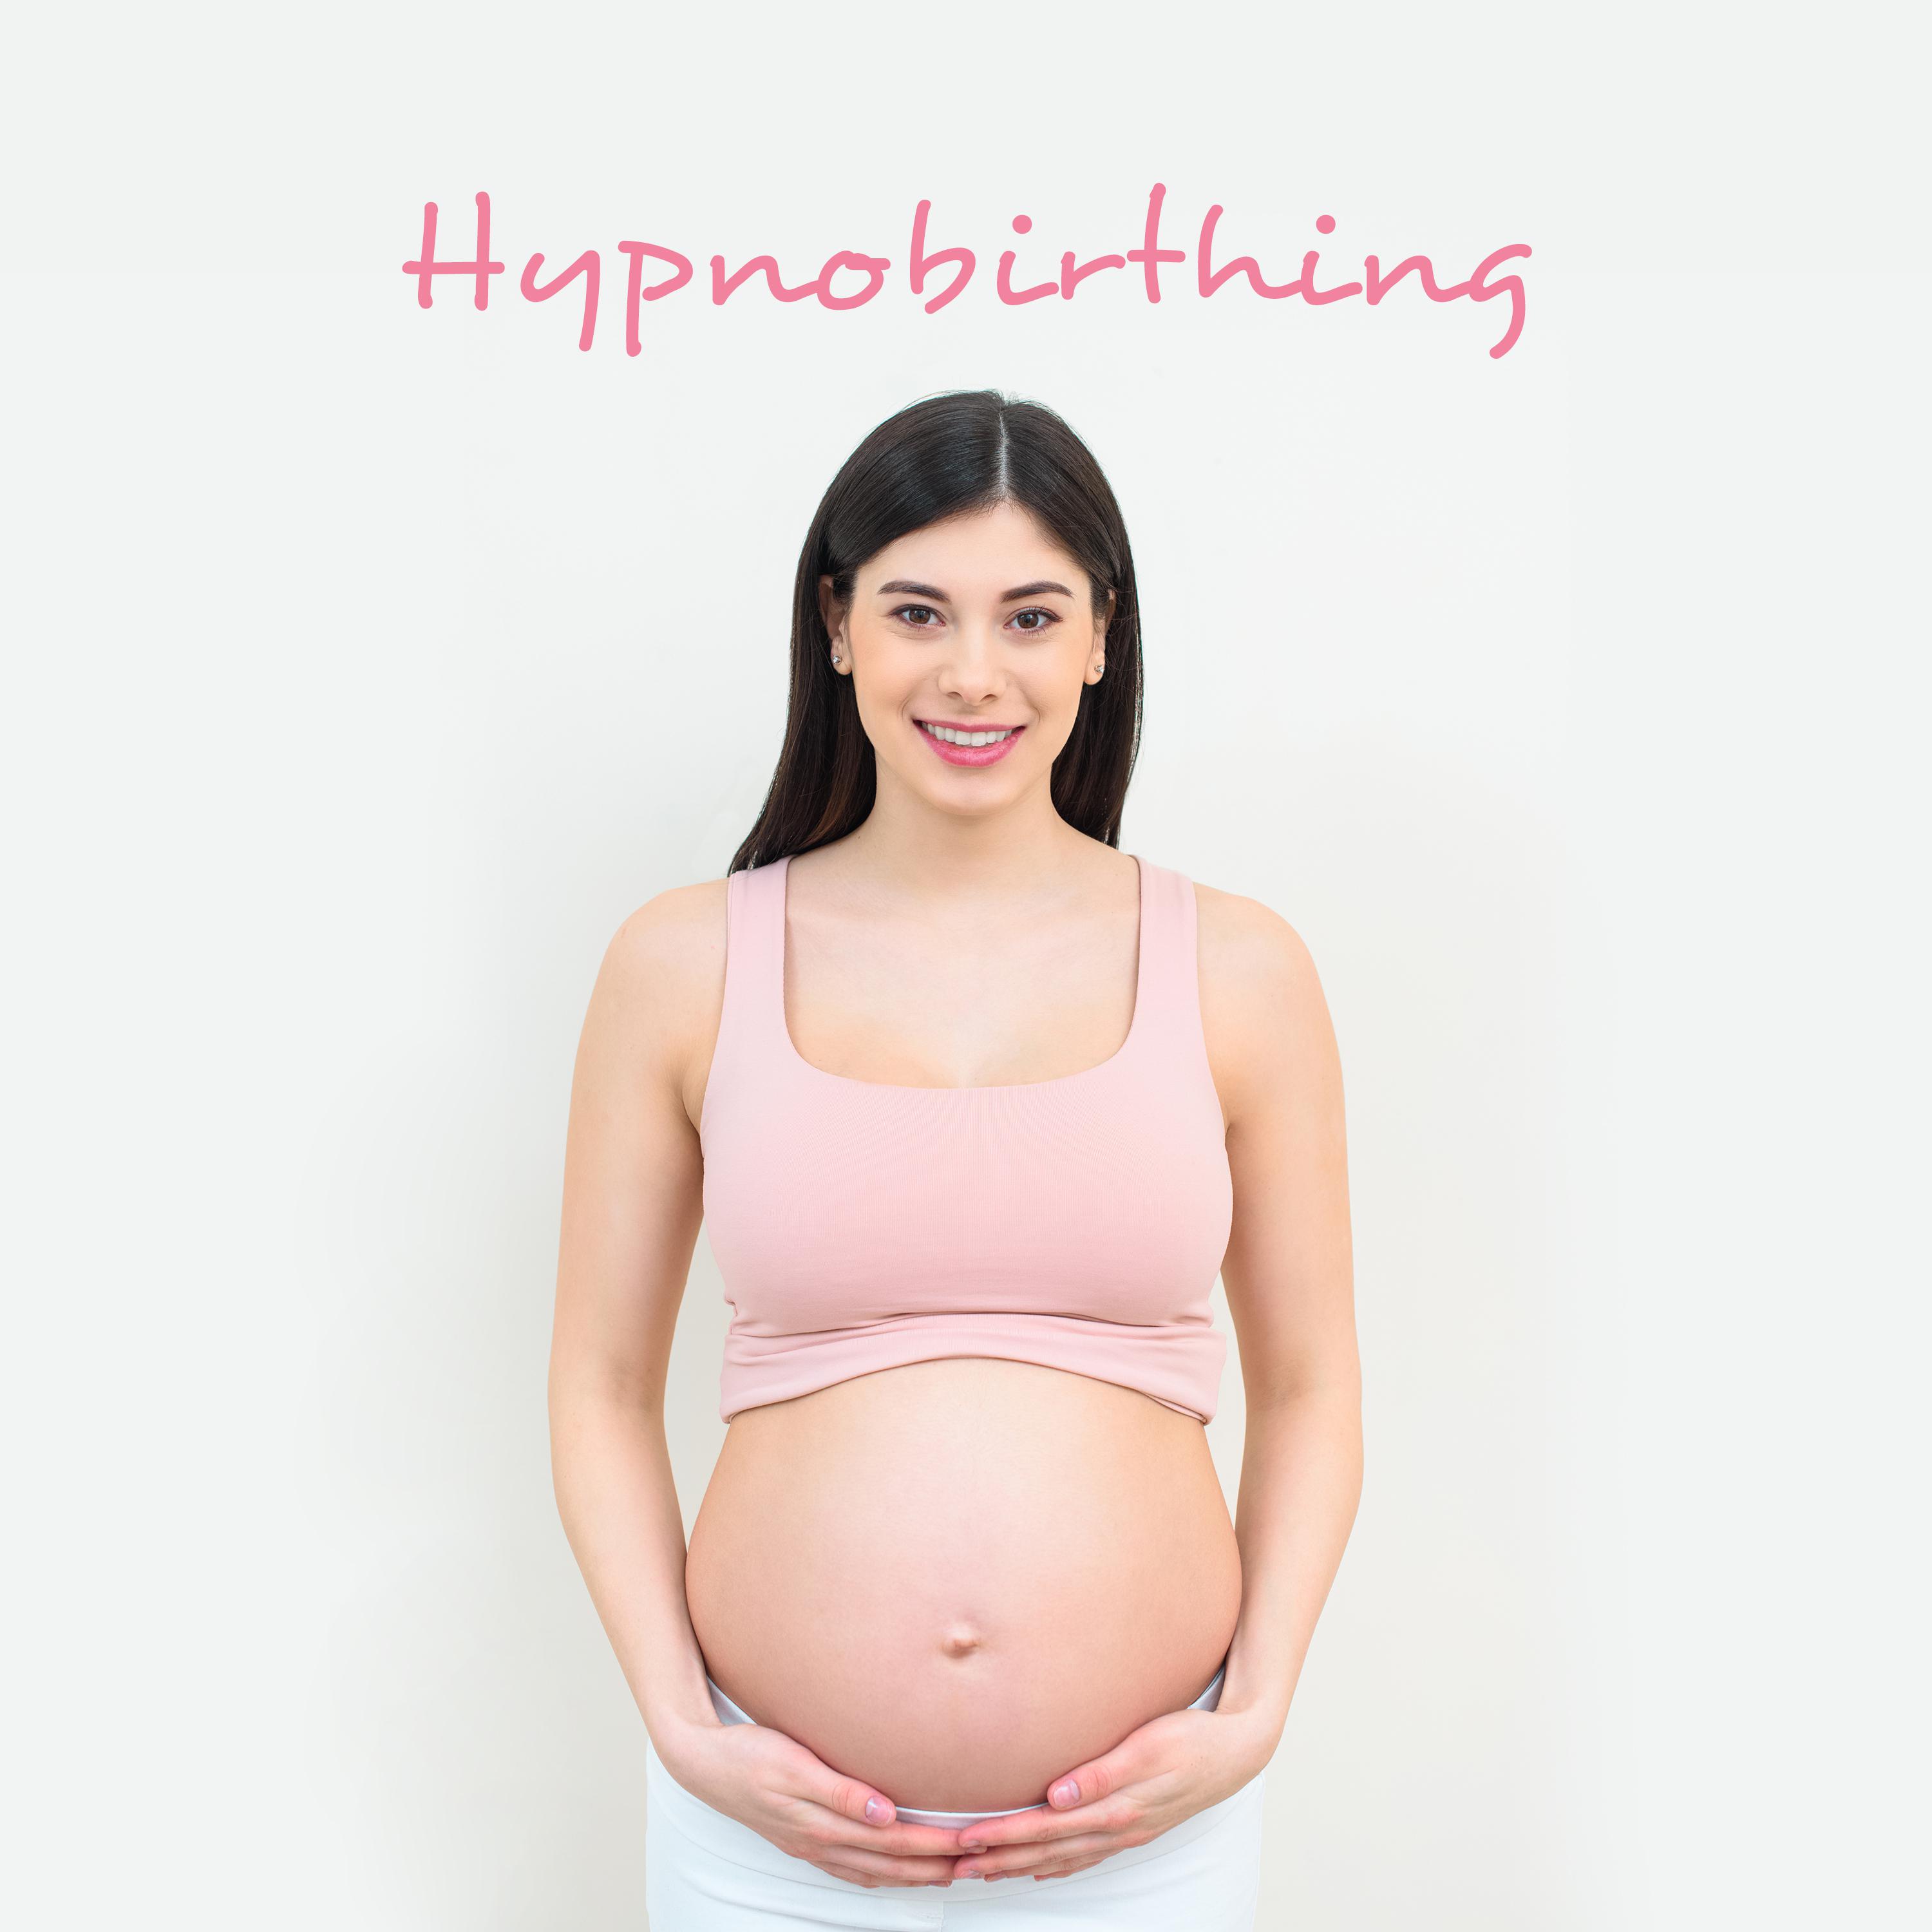 Hypnobirthing (Top of 15 Quiet & Peaceful Songs, Natural Childbirth without Pain)